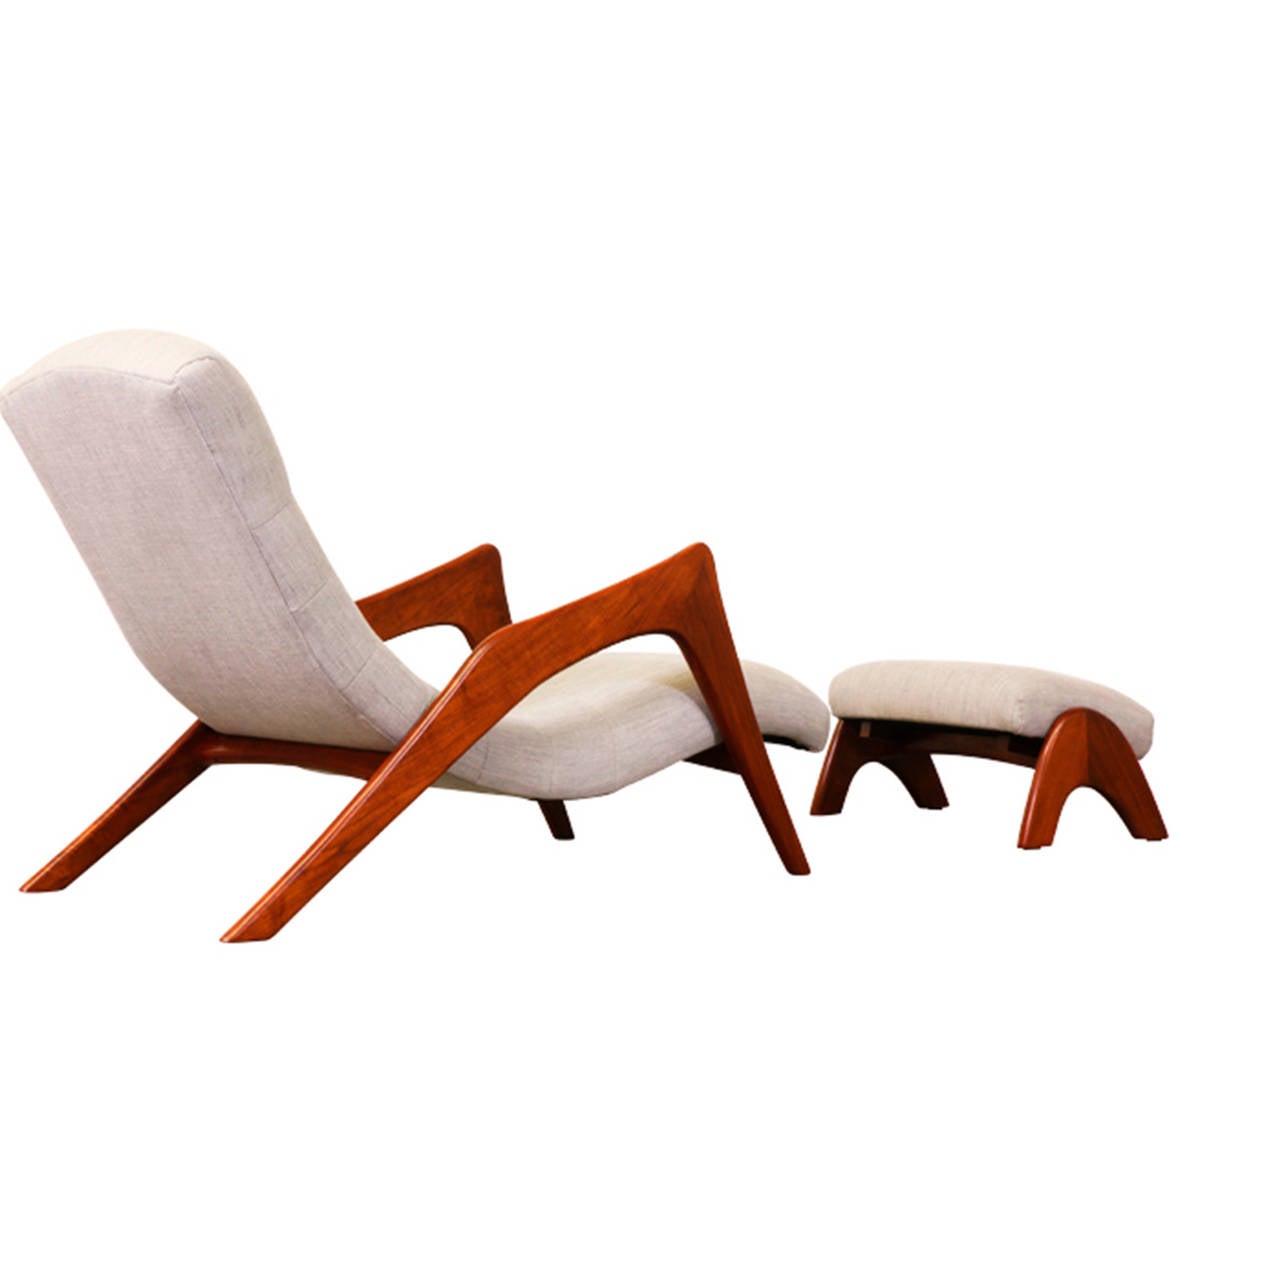 American Adrian Pearsall “Grasshopper” Chaise Lounge w/ Ottoman for Craft Associates